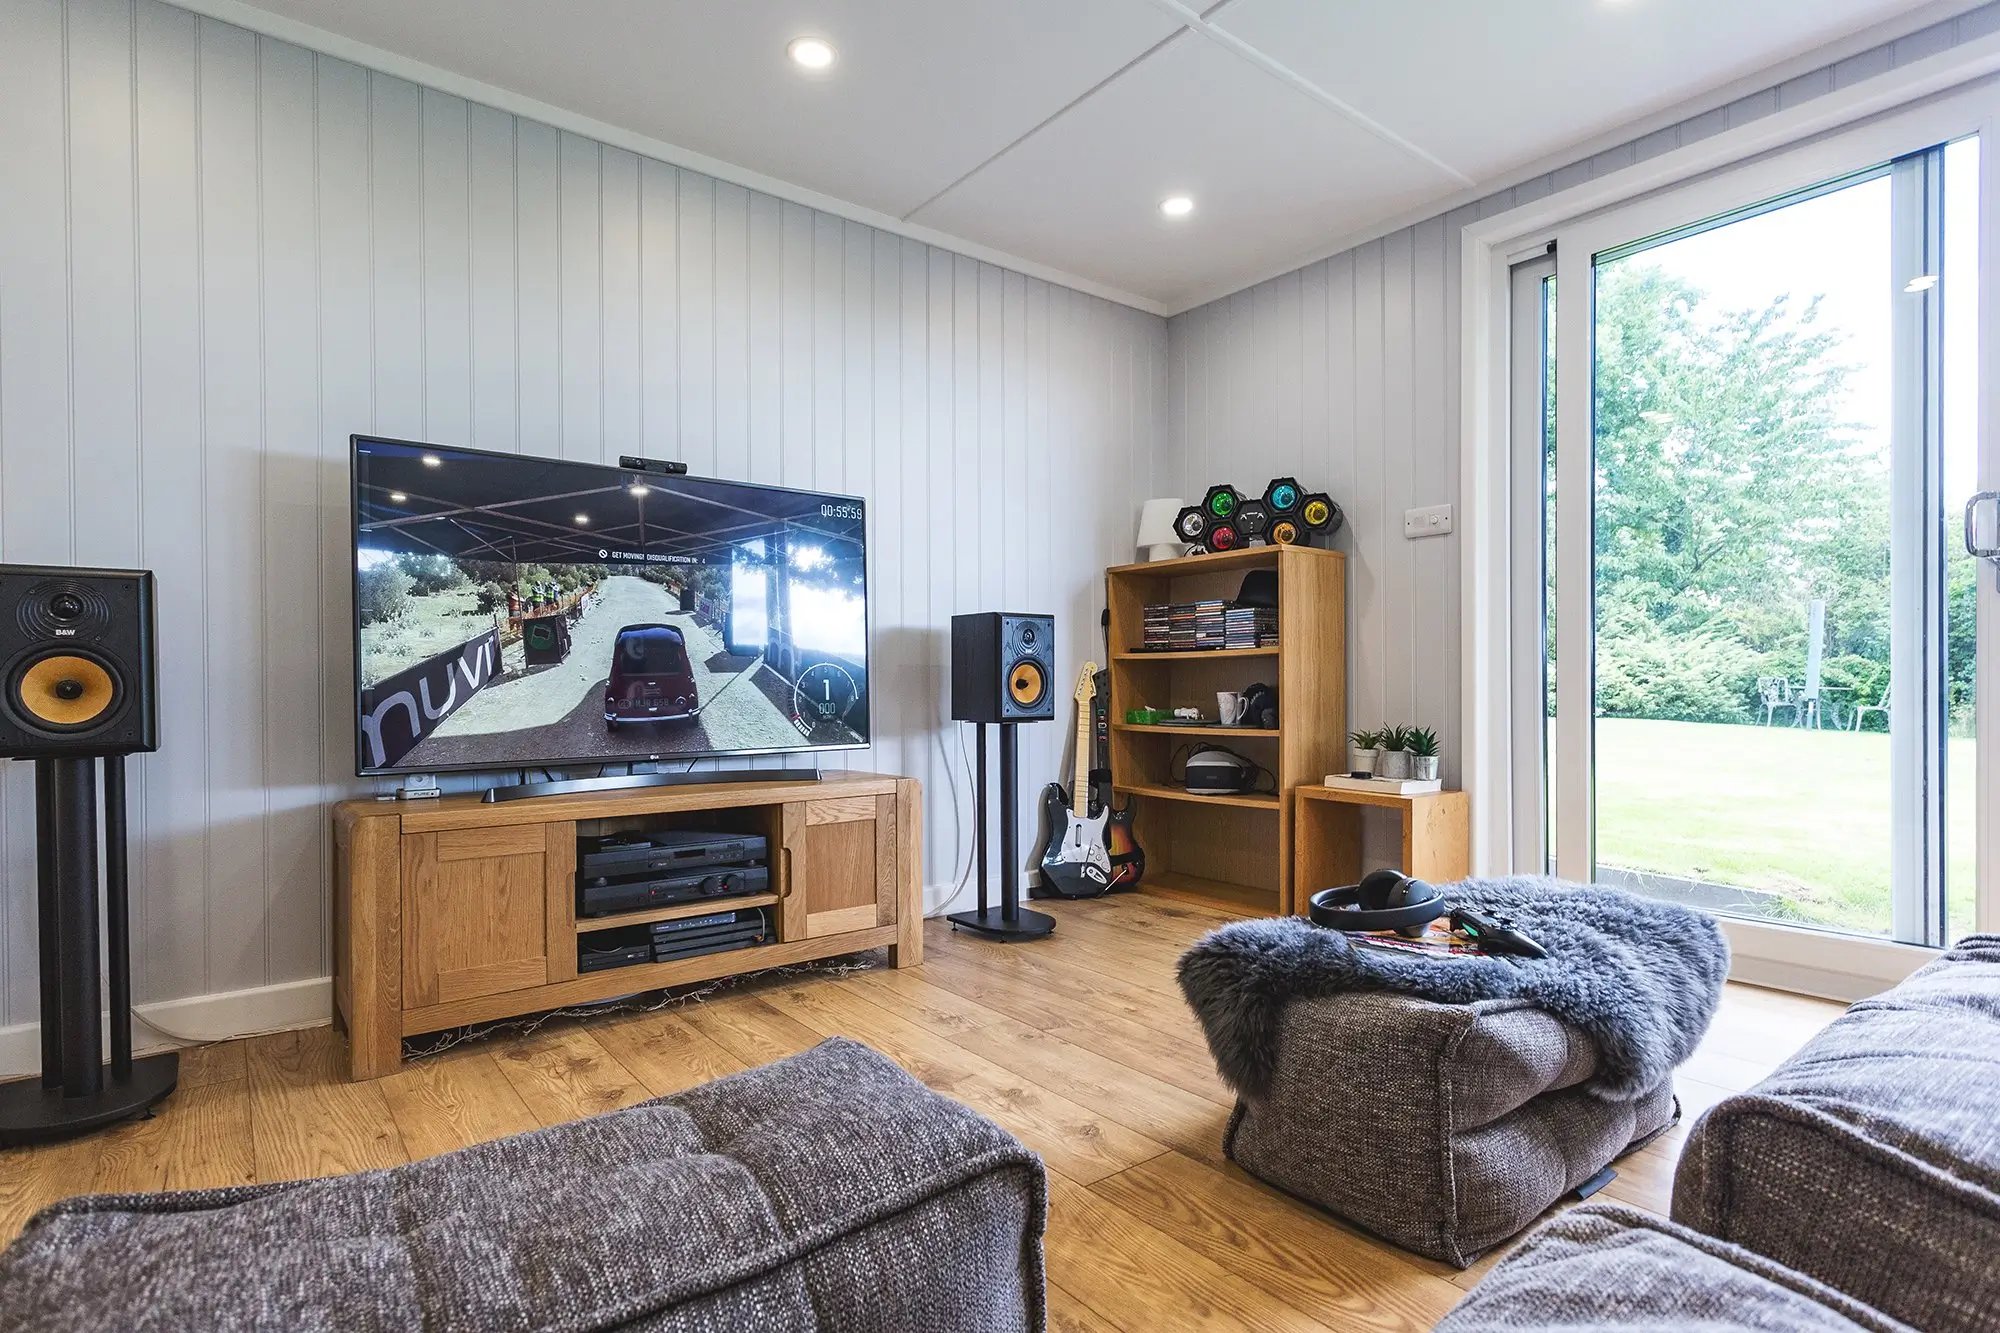 Inside view of garden room with grey sofas and foot stools and large flat screen TV with surround sound system and games console